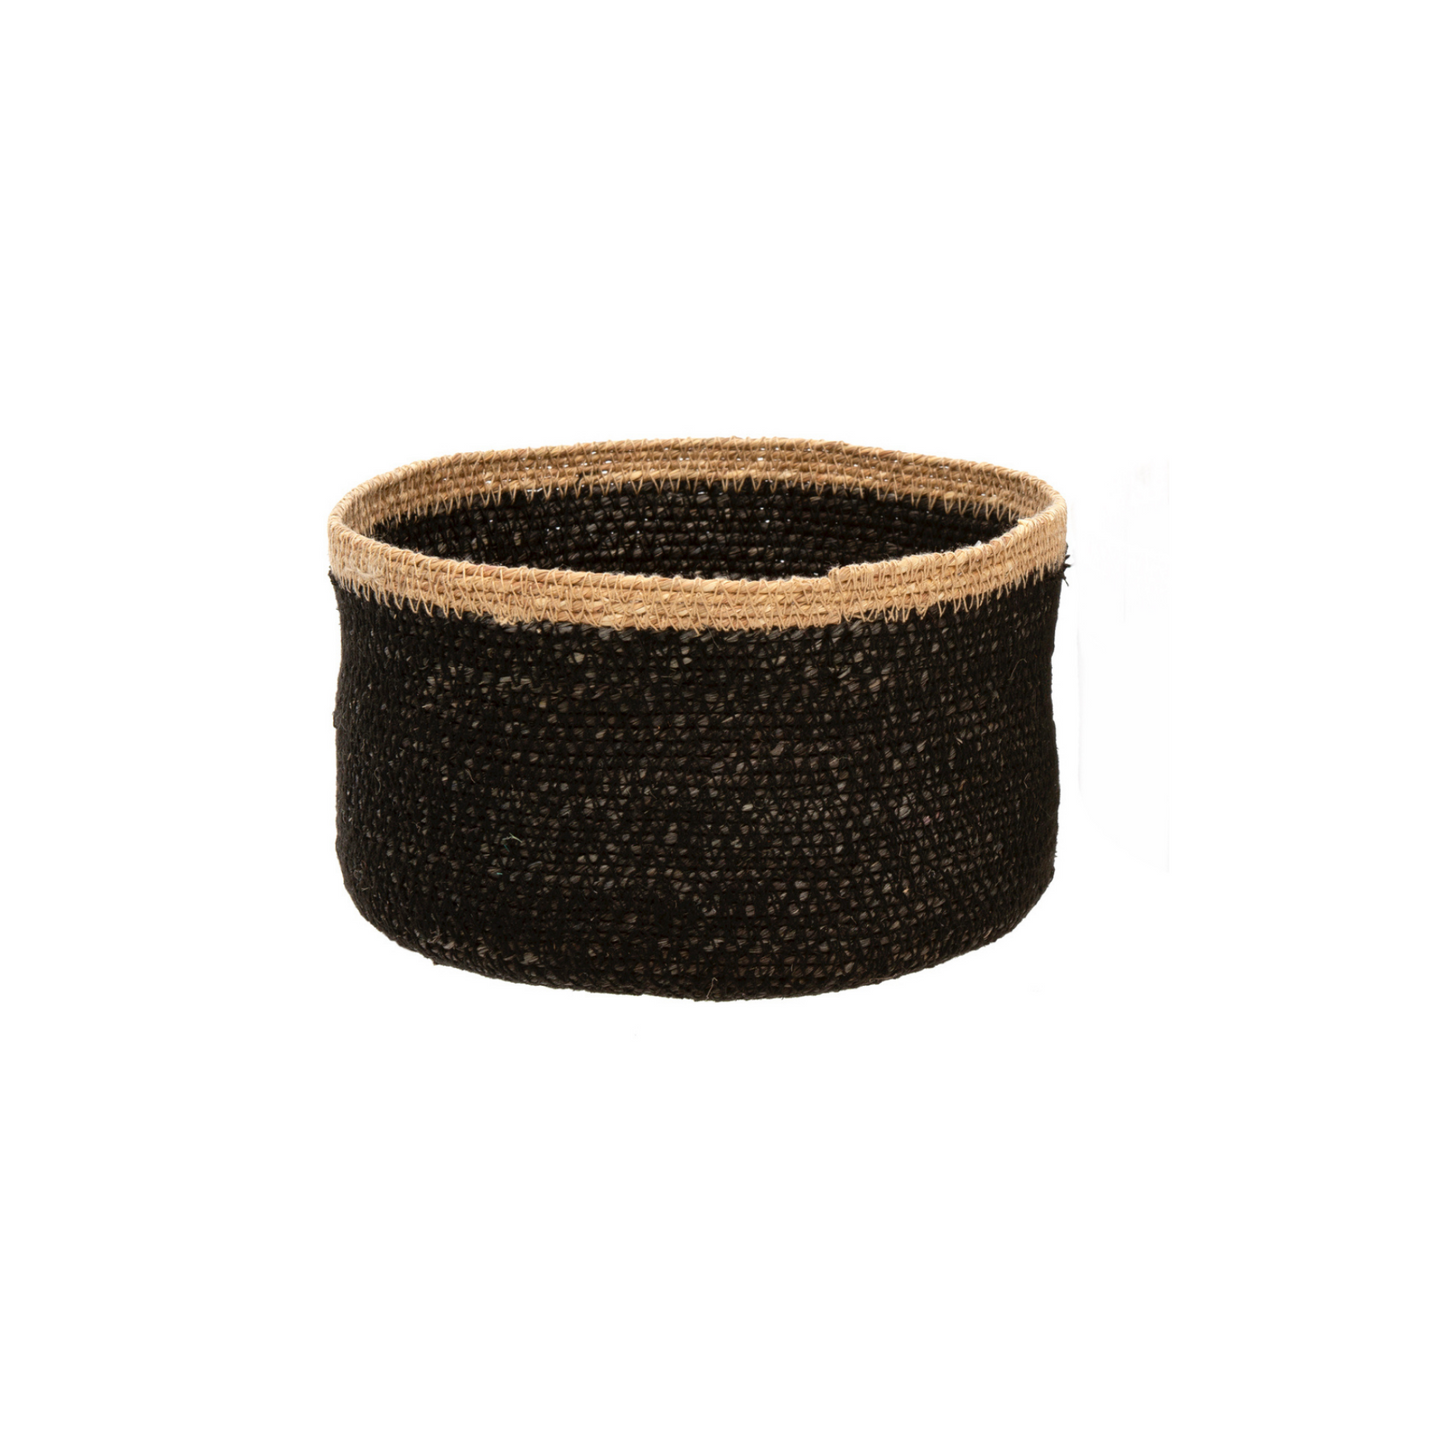 Black seagrass basket with tan stripe at top